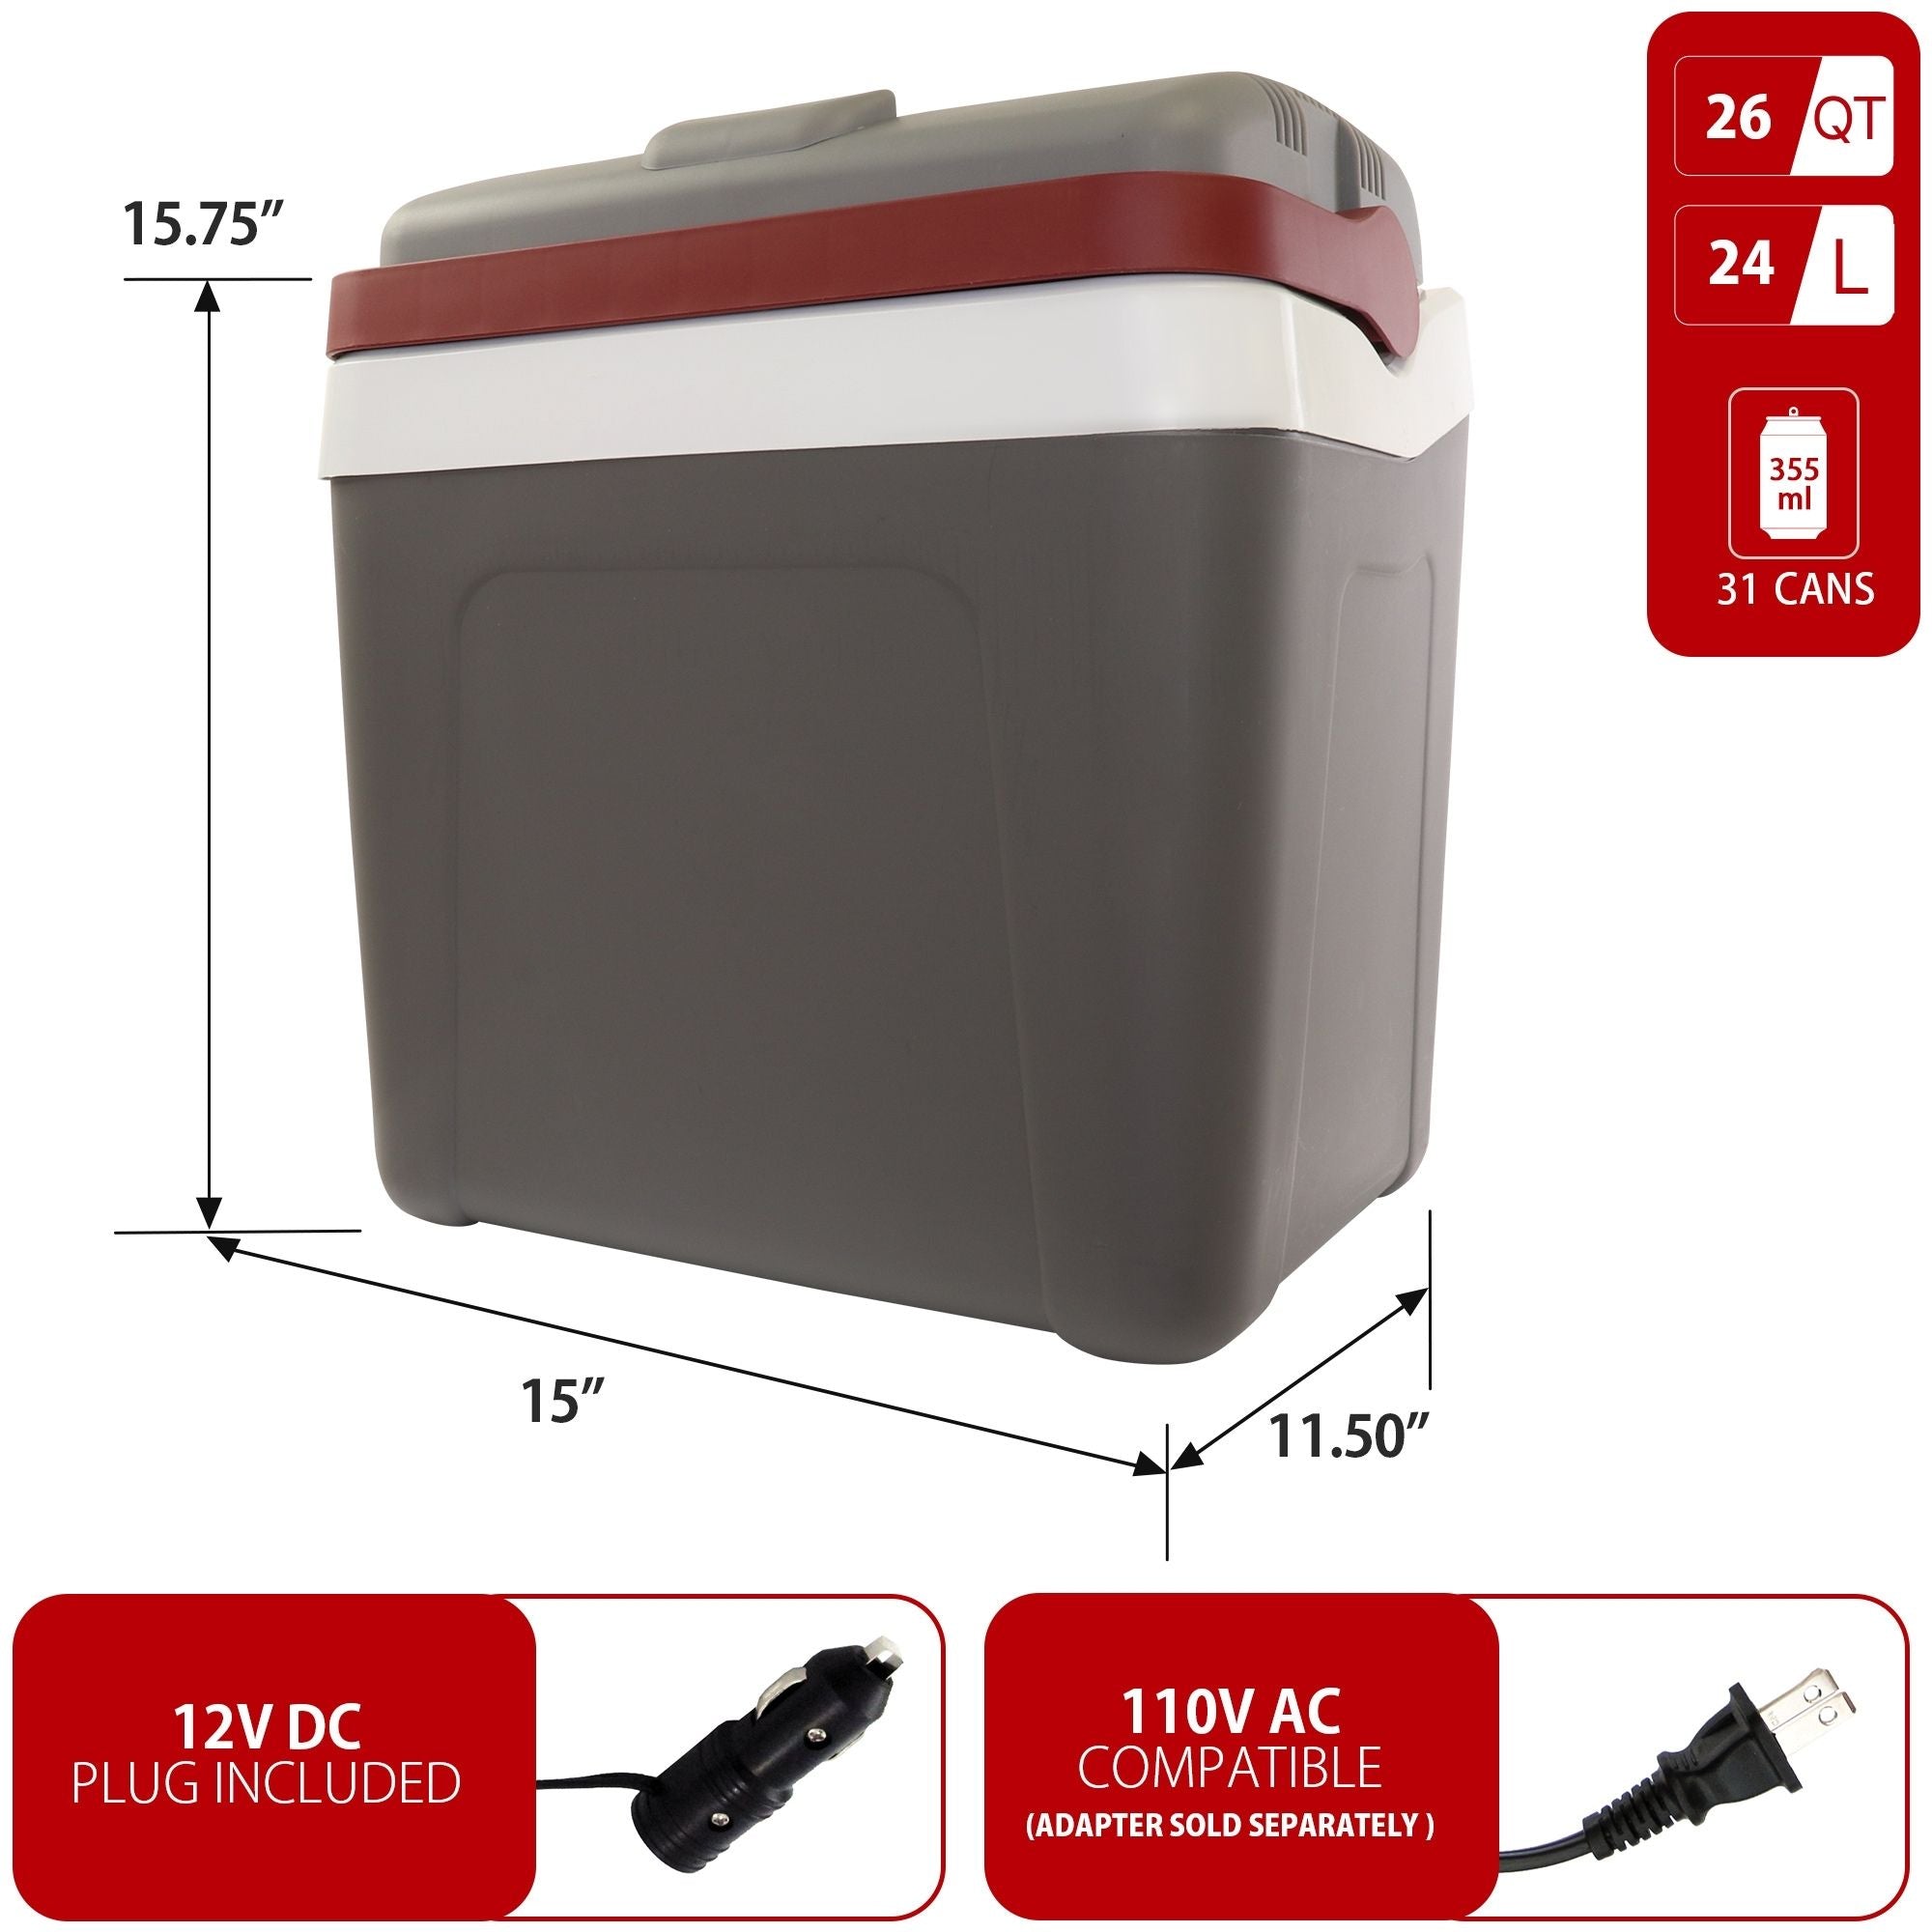 Koolatron 12V travel fridge, closed on a white background with dimensions and capacity labeled. Two inset images below show power adapters with text reading "12V DC plug included; AC compatible (adapter sold separately)"